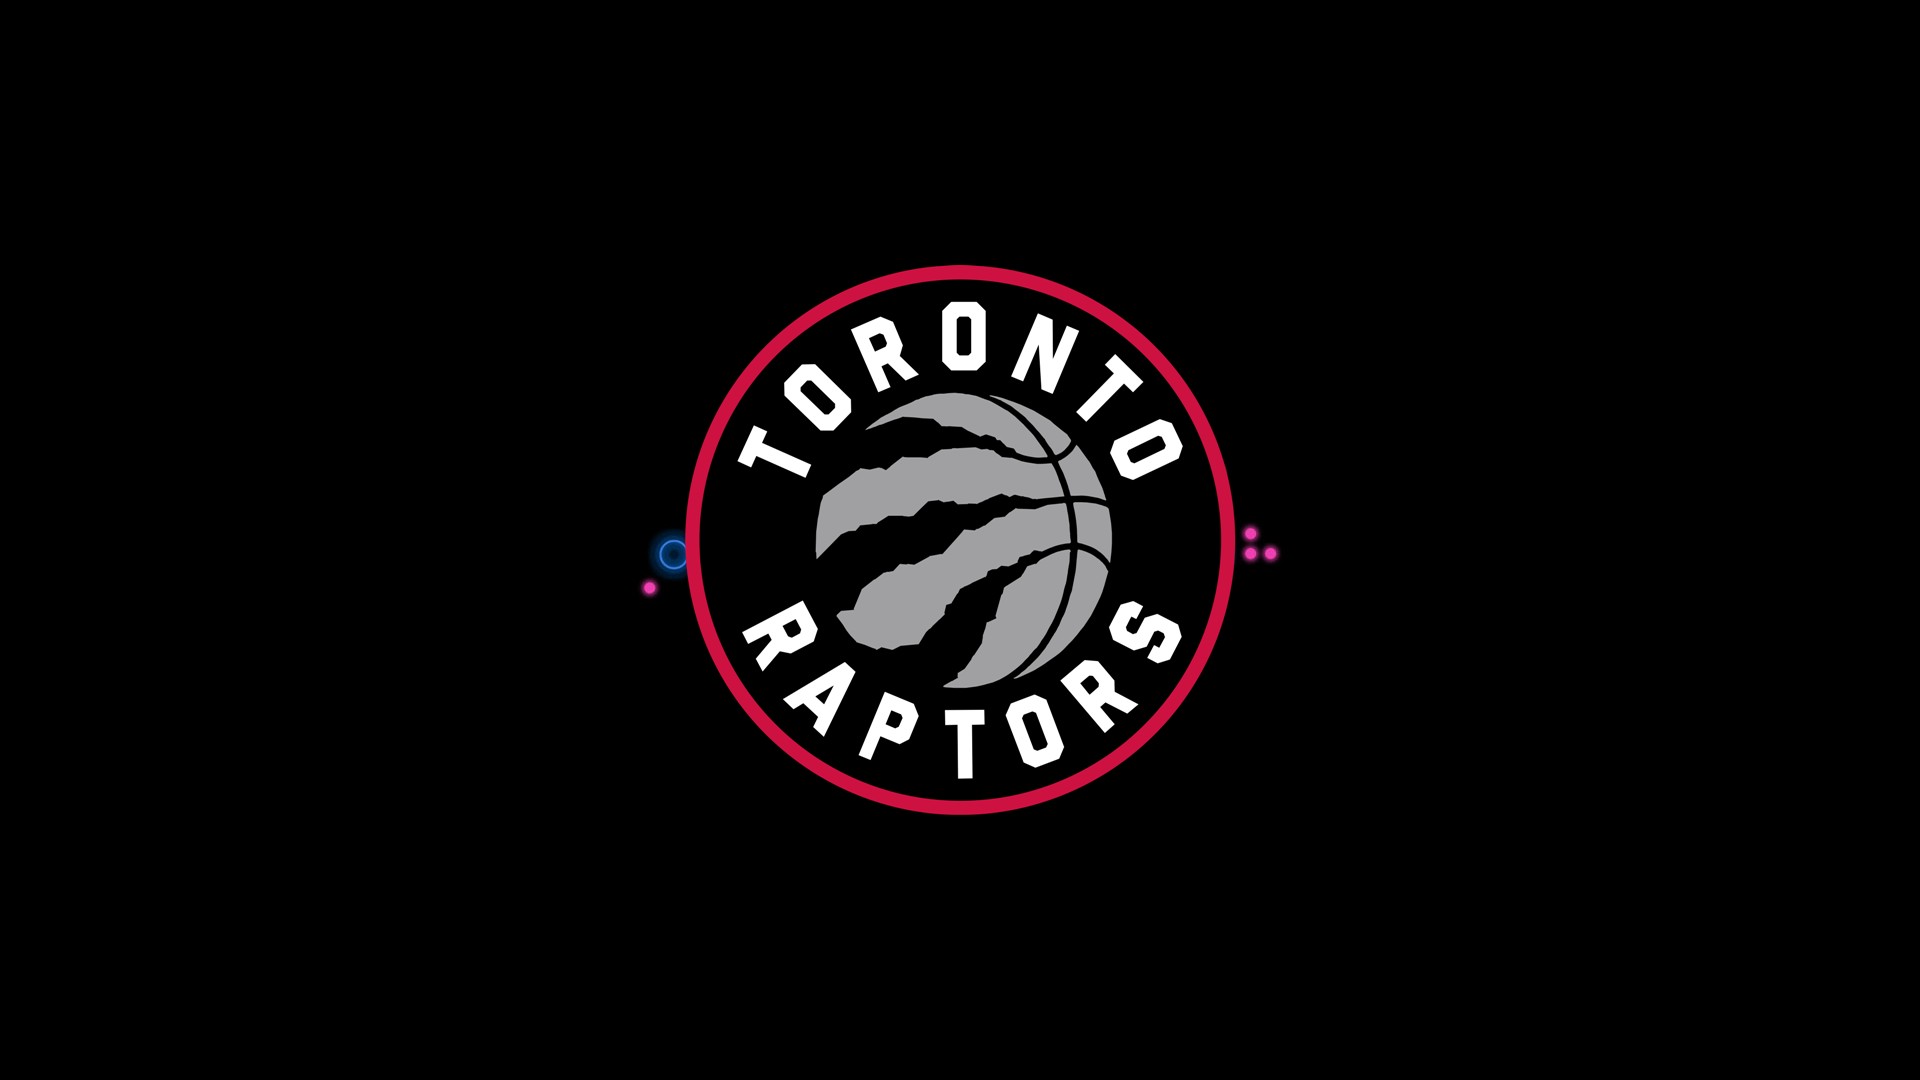 Raptors Basketball Desktop Wallpaper with image dimensions 1920x1080 pixel. You can make this wallpaper for your Desktop Computer Backgrounds, Windows or Mac Screensavers, iPhone Lock screen, Tablet or Android and another Mobile Phone device